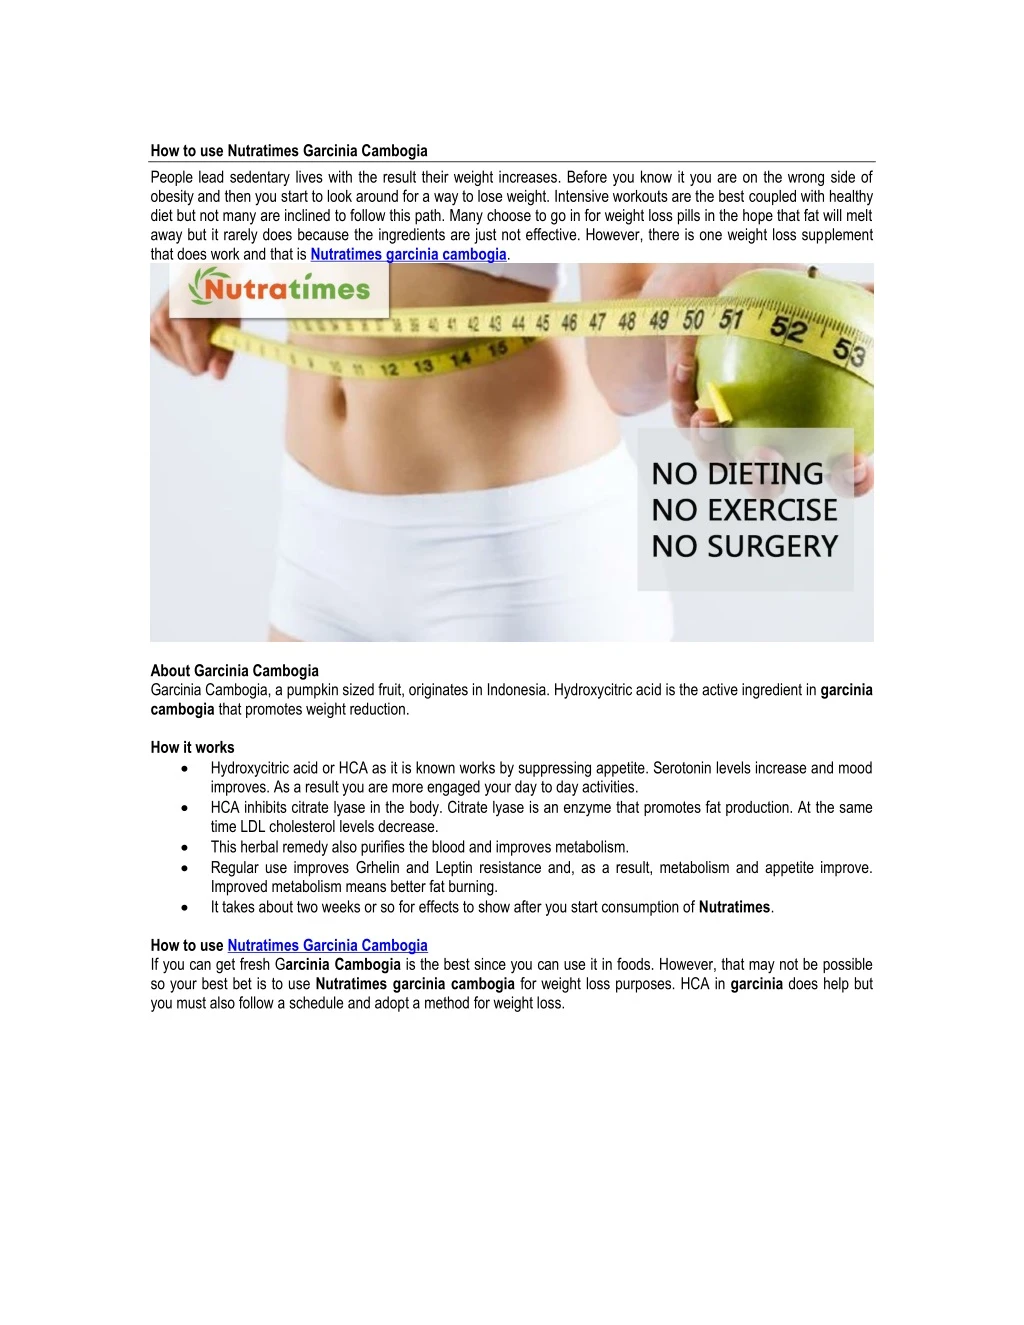 how to use nutratimes garcinia cambogia people